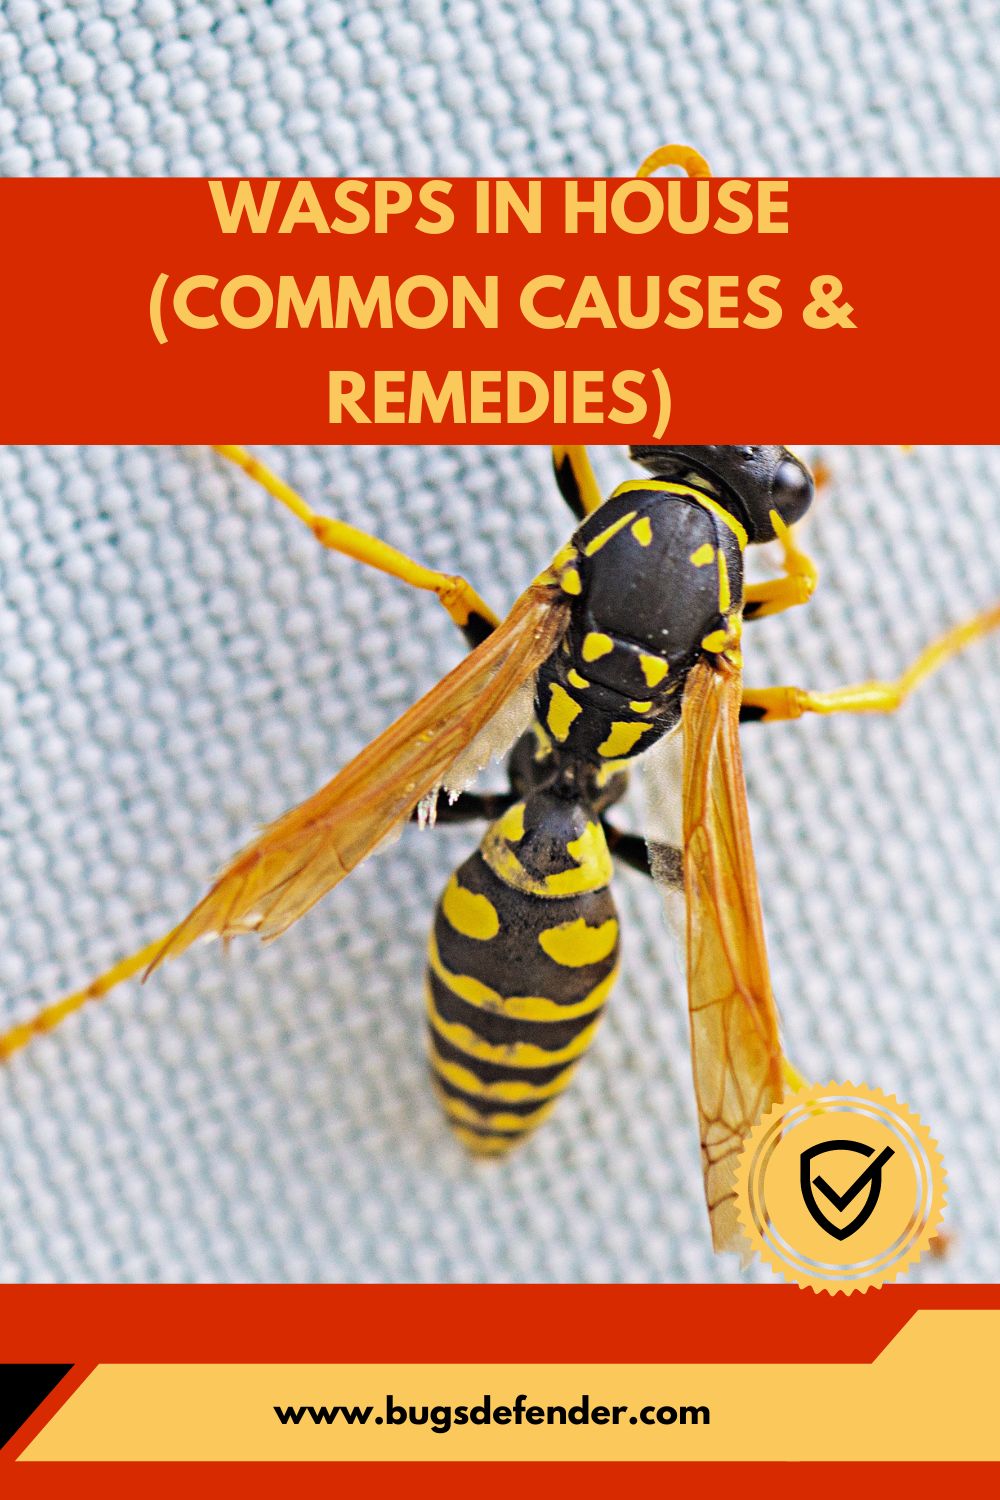 Wasps in House (Common Causes & Remedies) pin 1